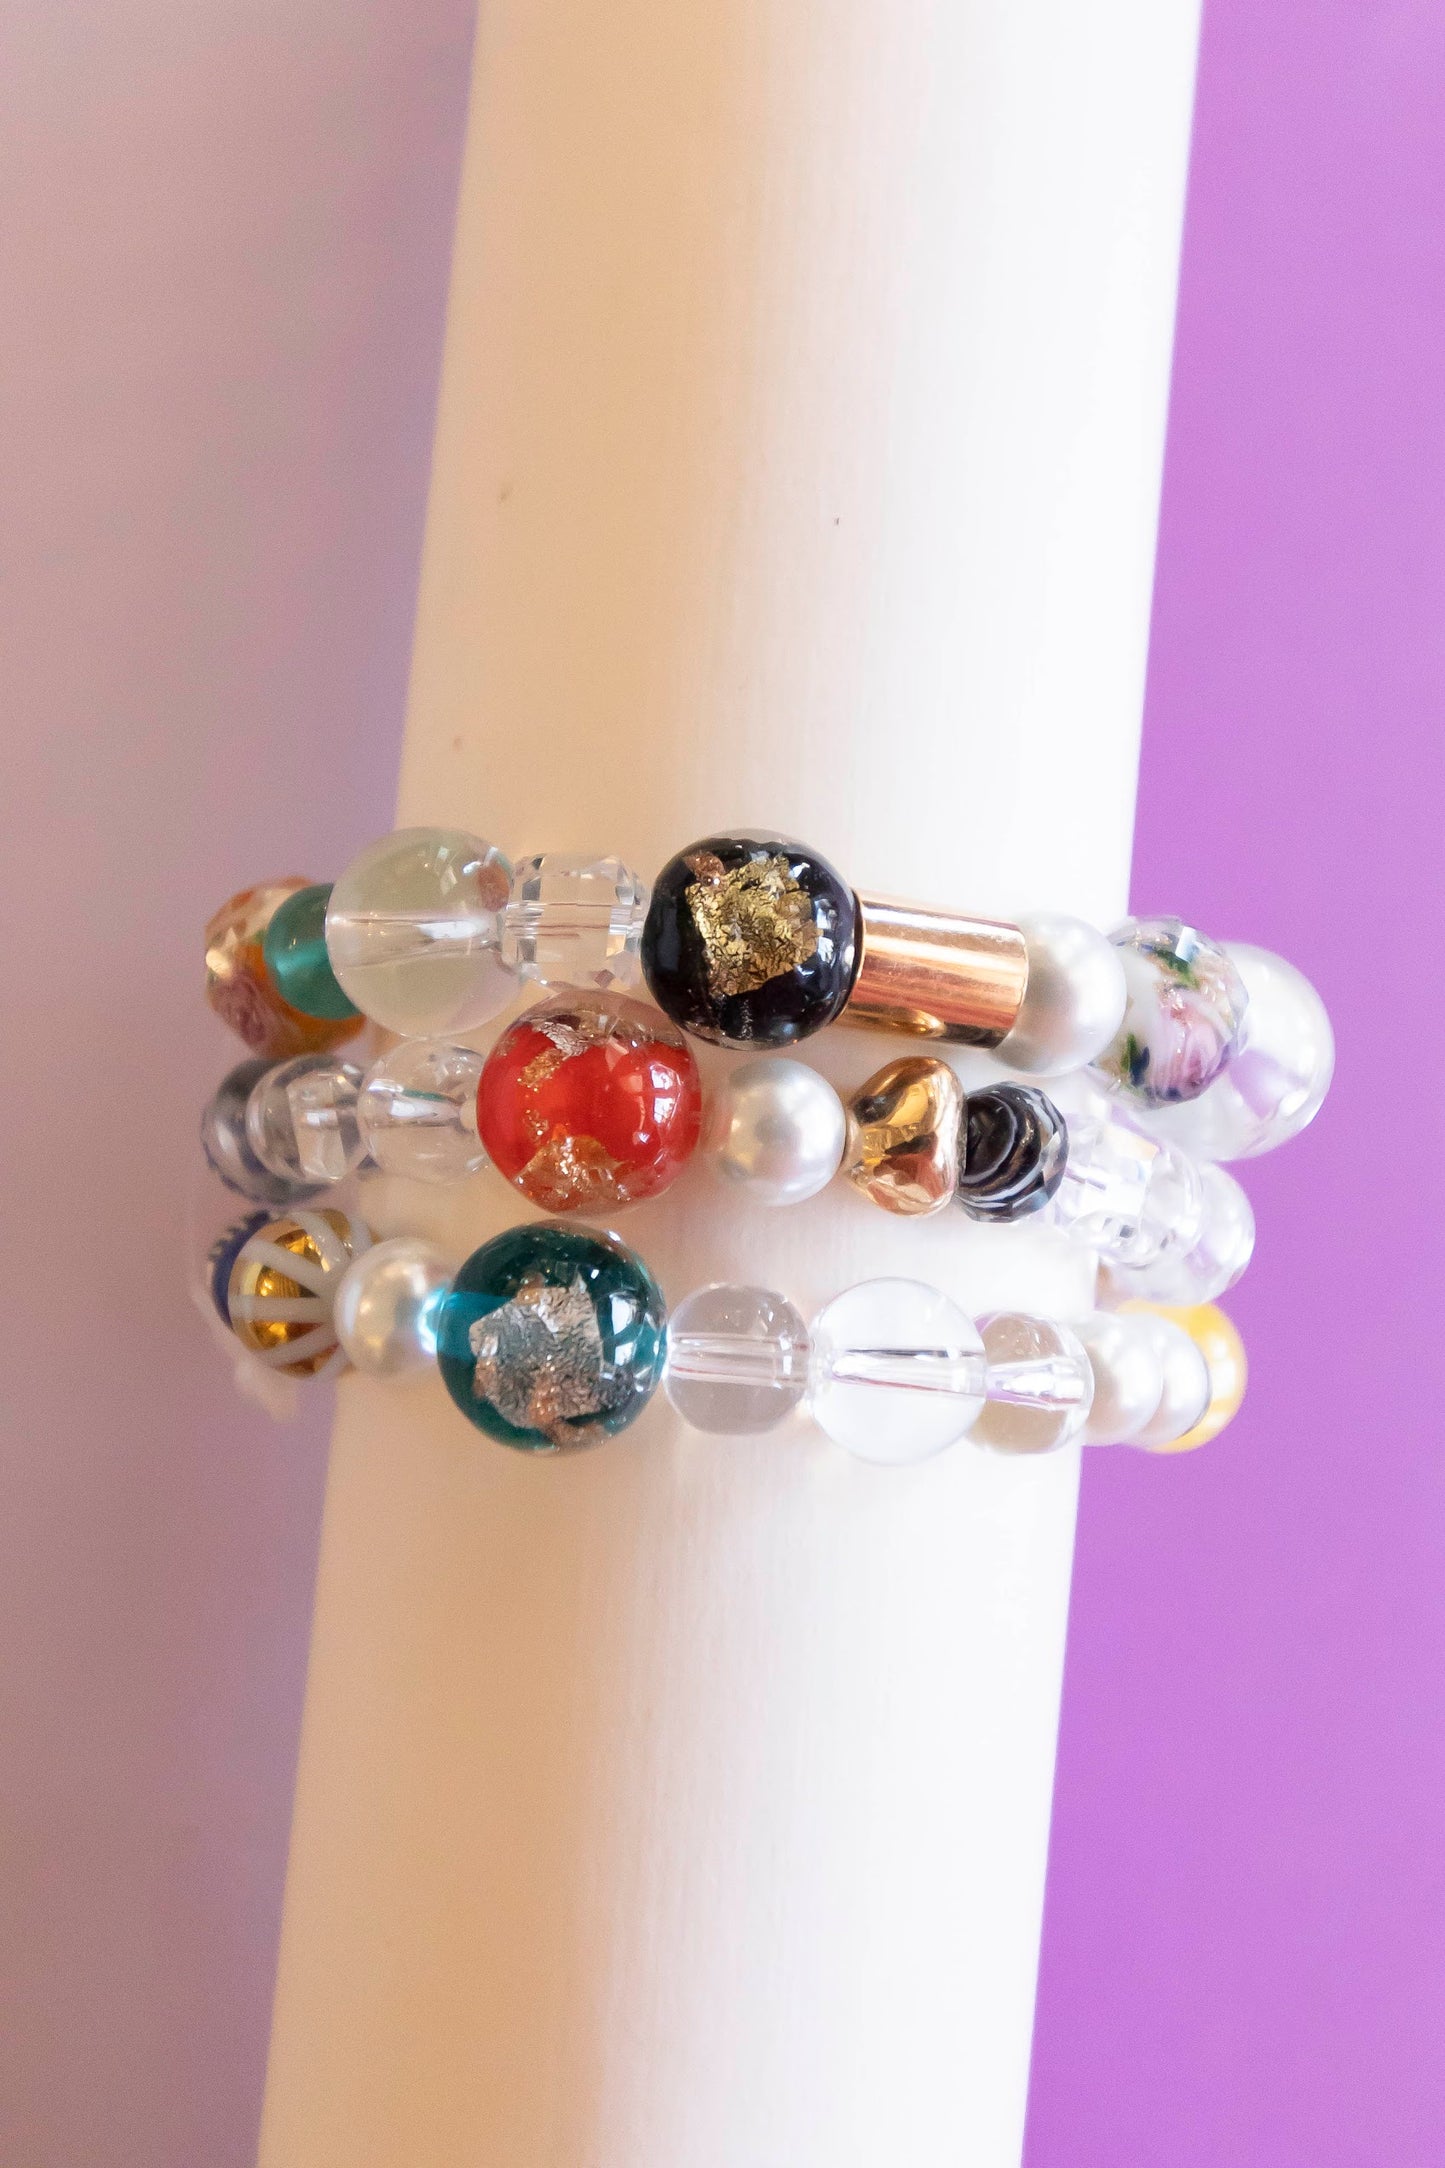 Load image into Gallery viewer, Sandee Glass Beeaded Bracelet Set | Clear and Multicolor Round Glass Beads | Gold Leaf Details | Eclectic Spring and Summer Layering Bracelets
